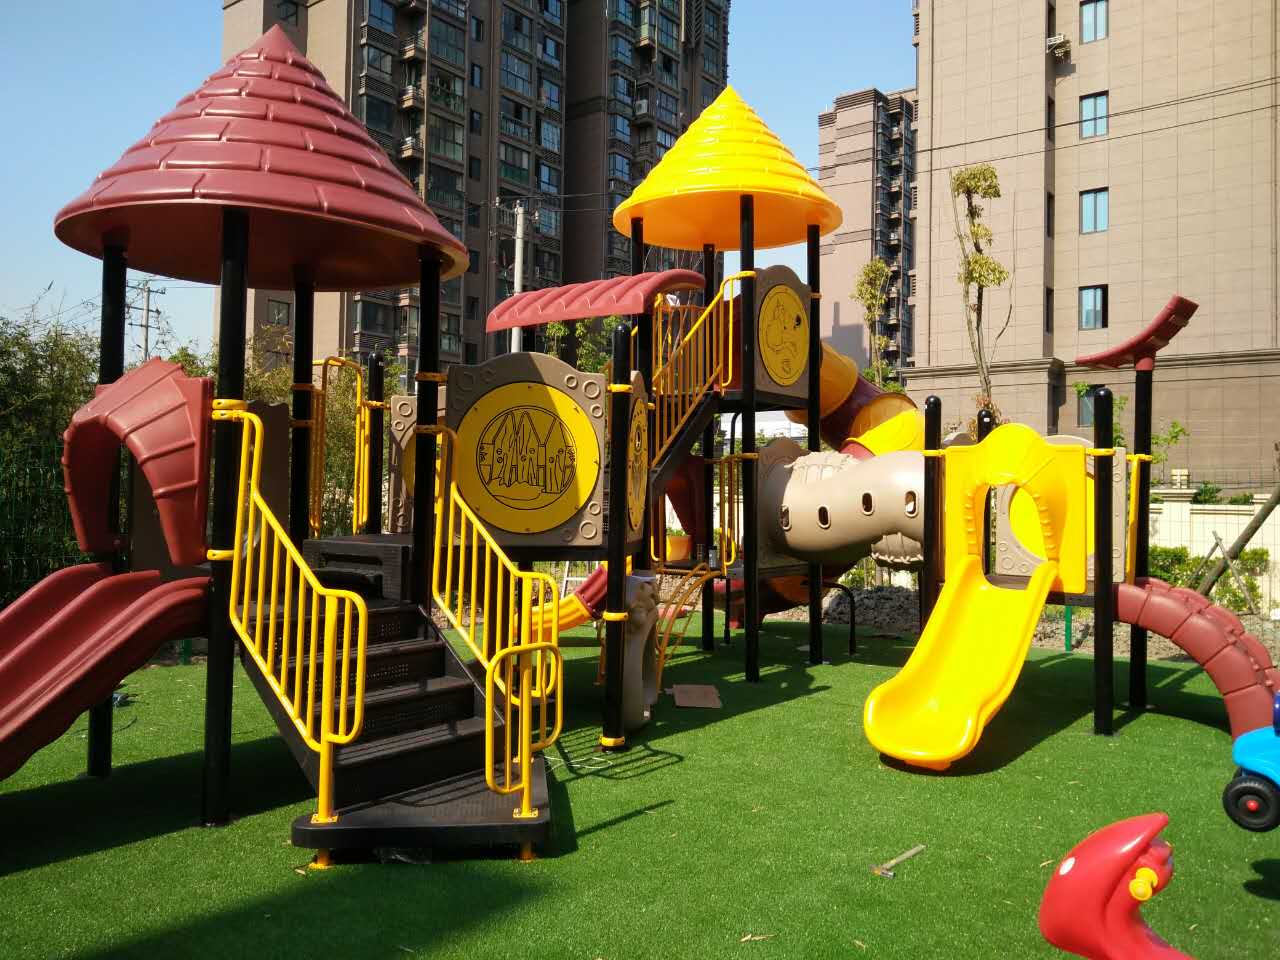 Should consumers buy outdoor playground equipment?